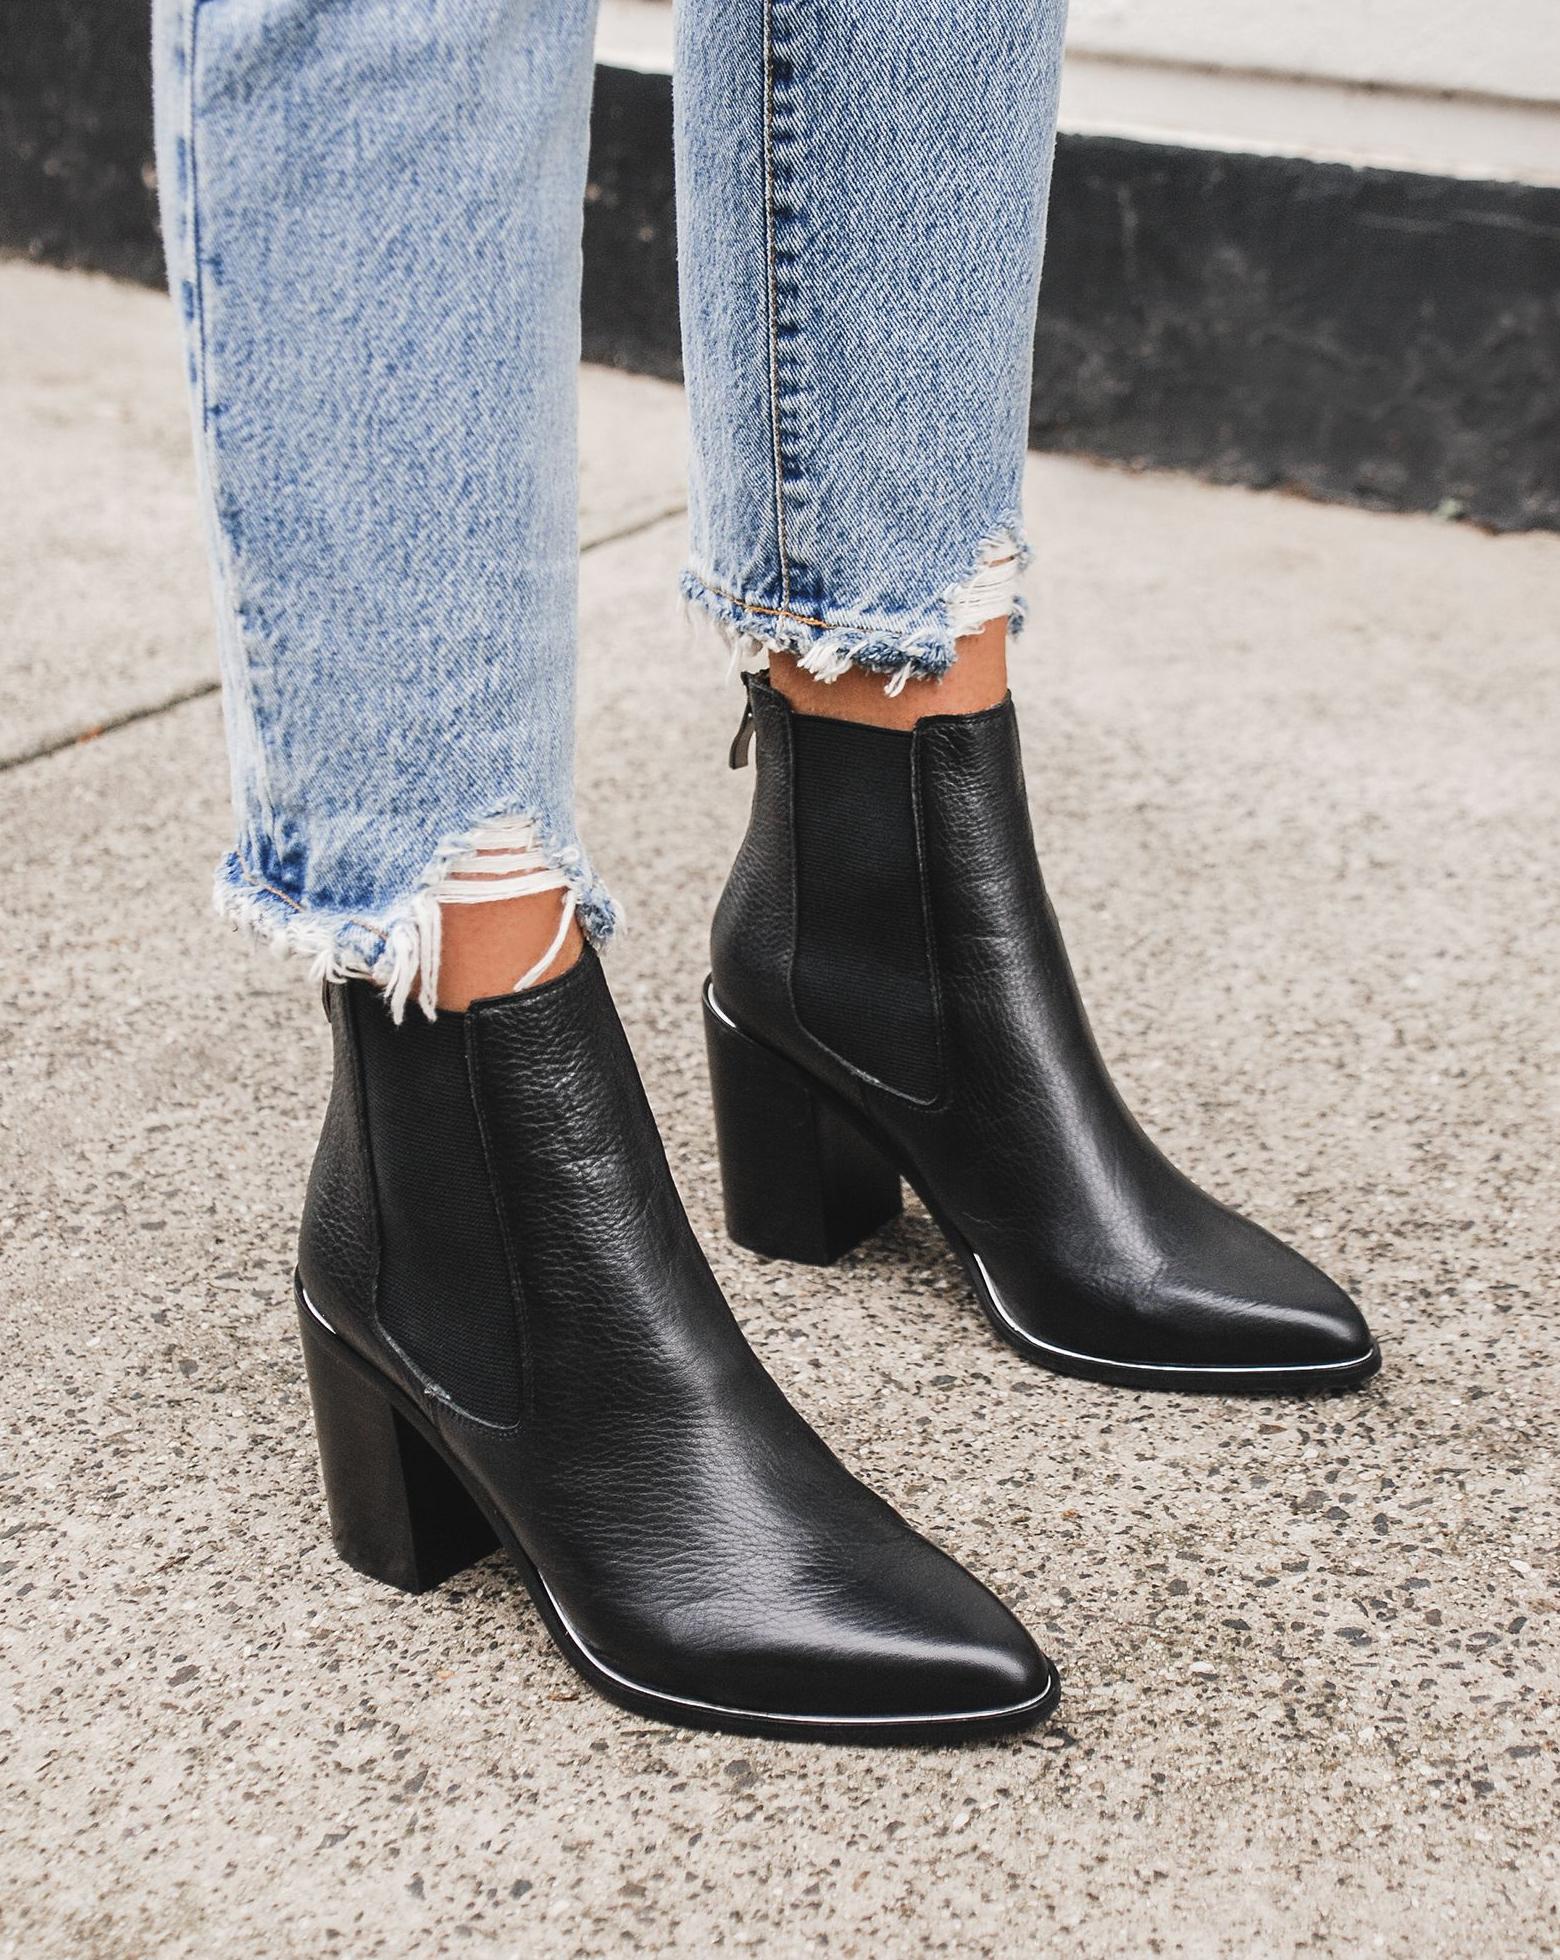 Can I Wear High Heel Ankle Boots with Jeans 2022 - ShoesOutfitIdeas.com